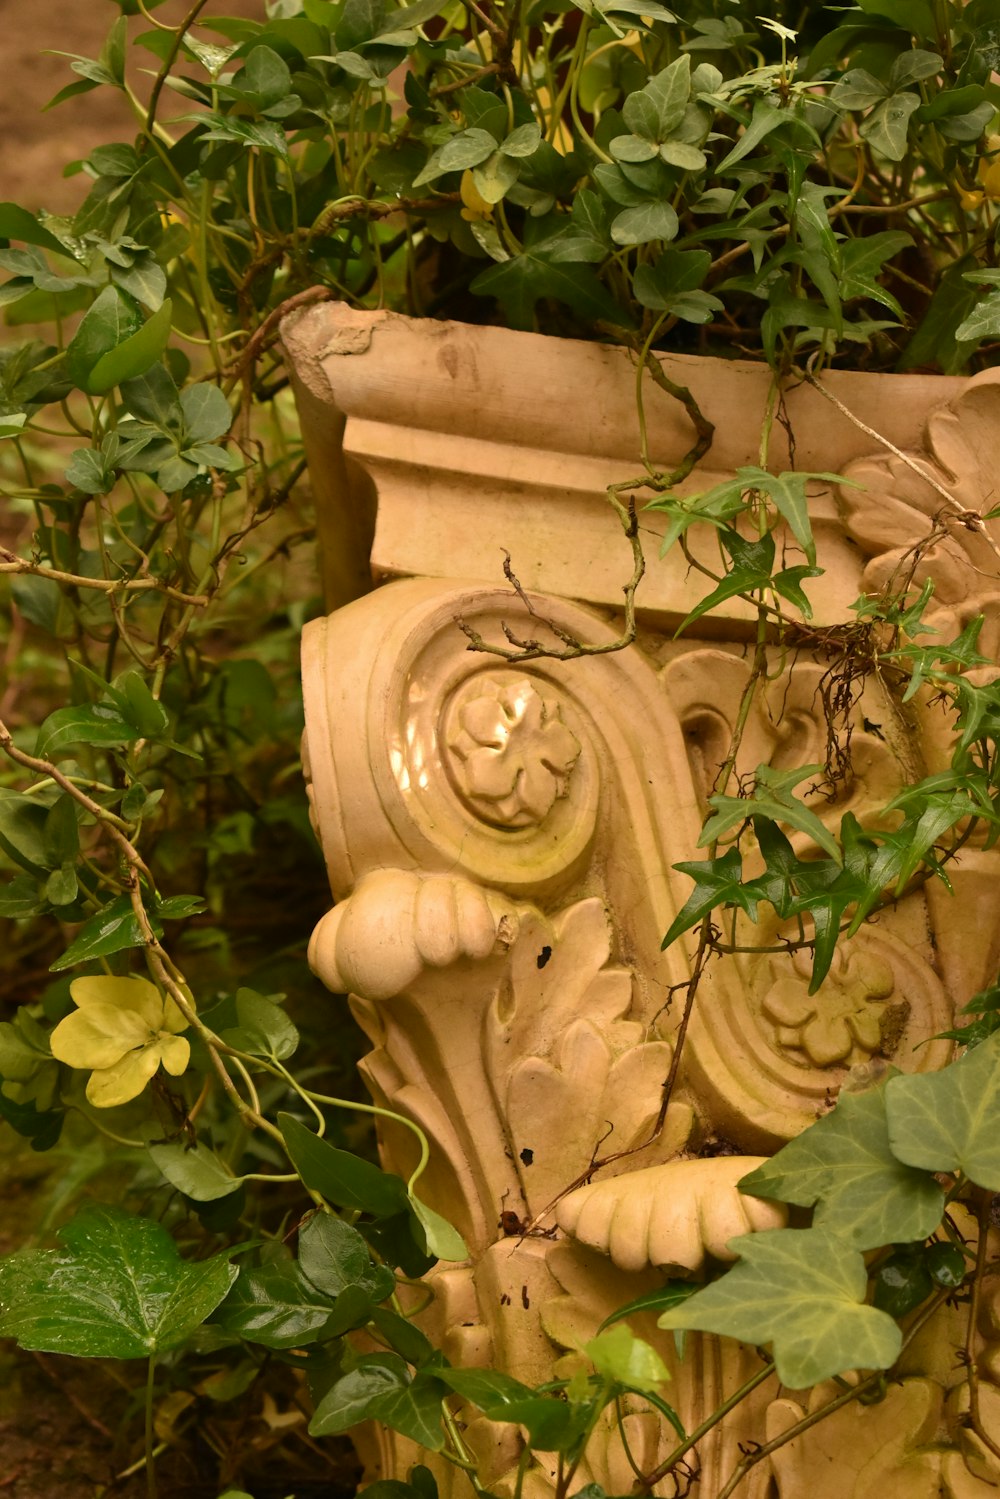 a close up of a planter with vines growing around it